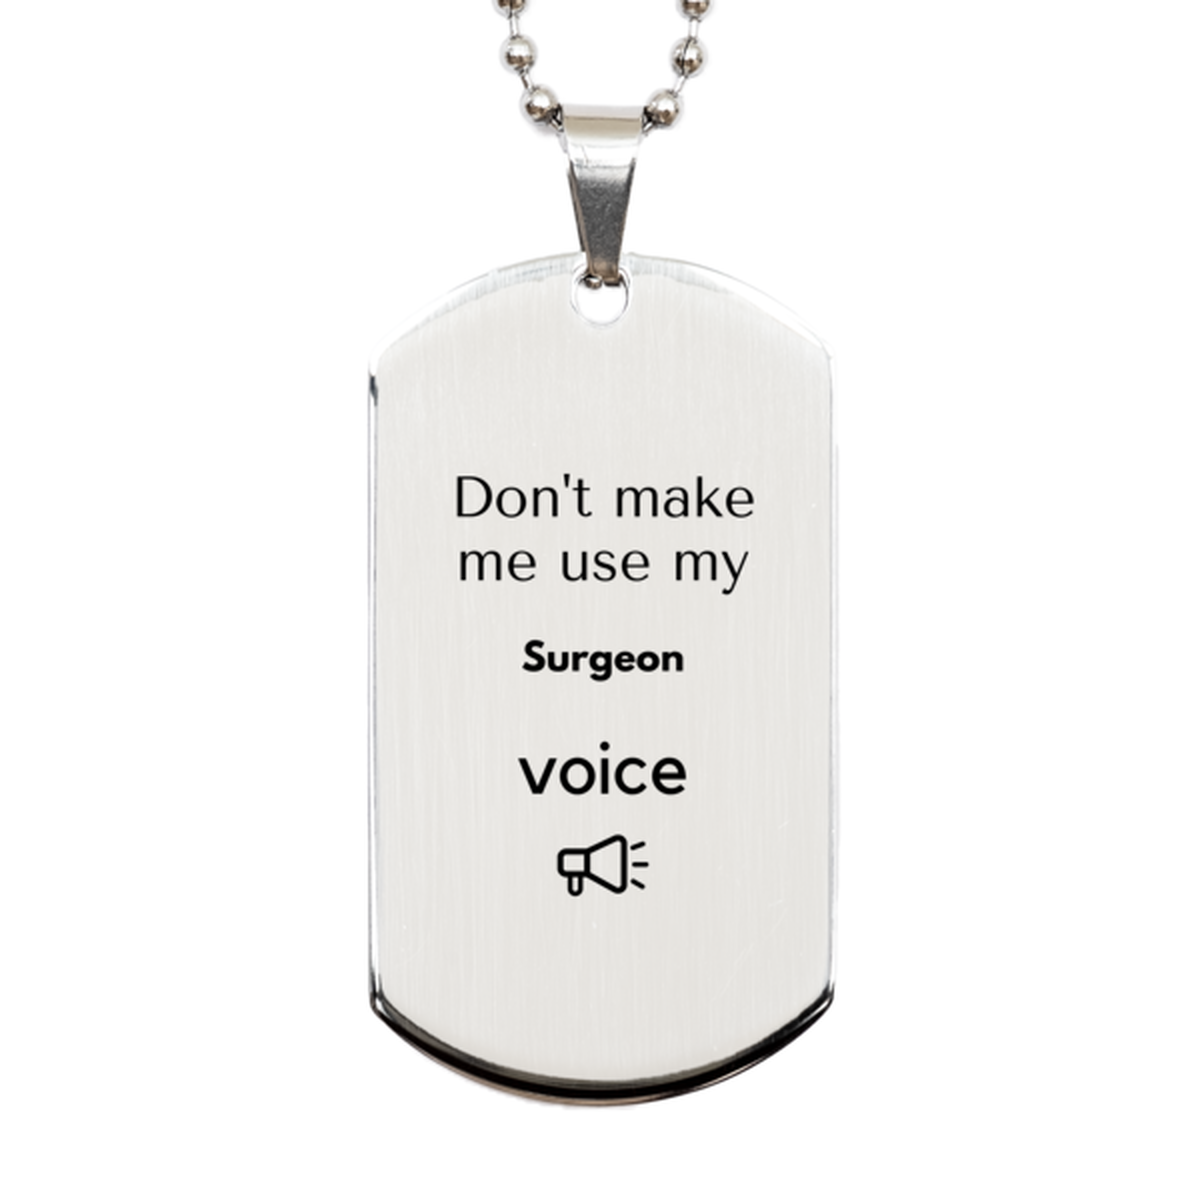 Don't make me use my Surgeon voice, Sarcasm Surgeon Gifts, Christmas Surgeon Silver Dog Tag Birthday Unique Gifts For Surgeon Coworkers, Men, Women, Colleague, Friends